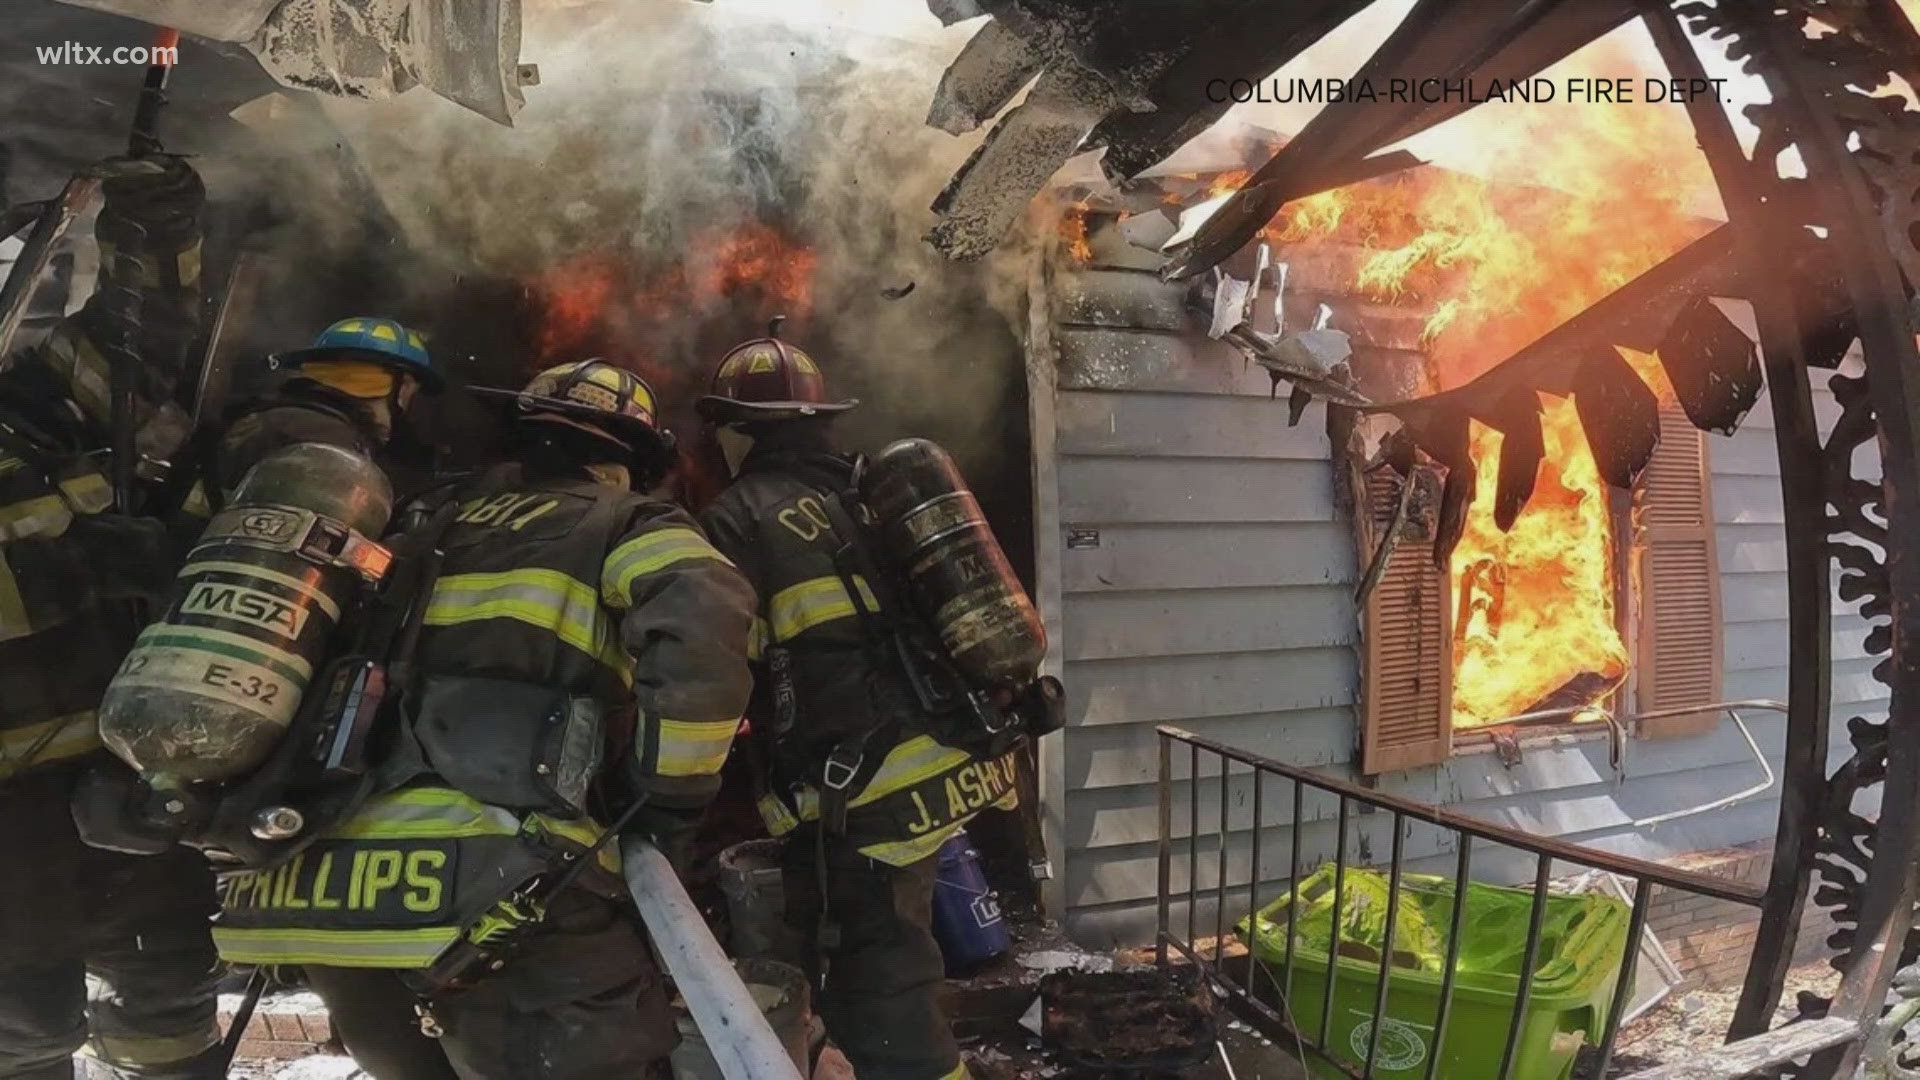 Photos from the scene showed flames inundating the vacant house on Thursday afternoon.